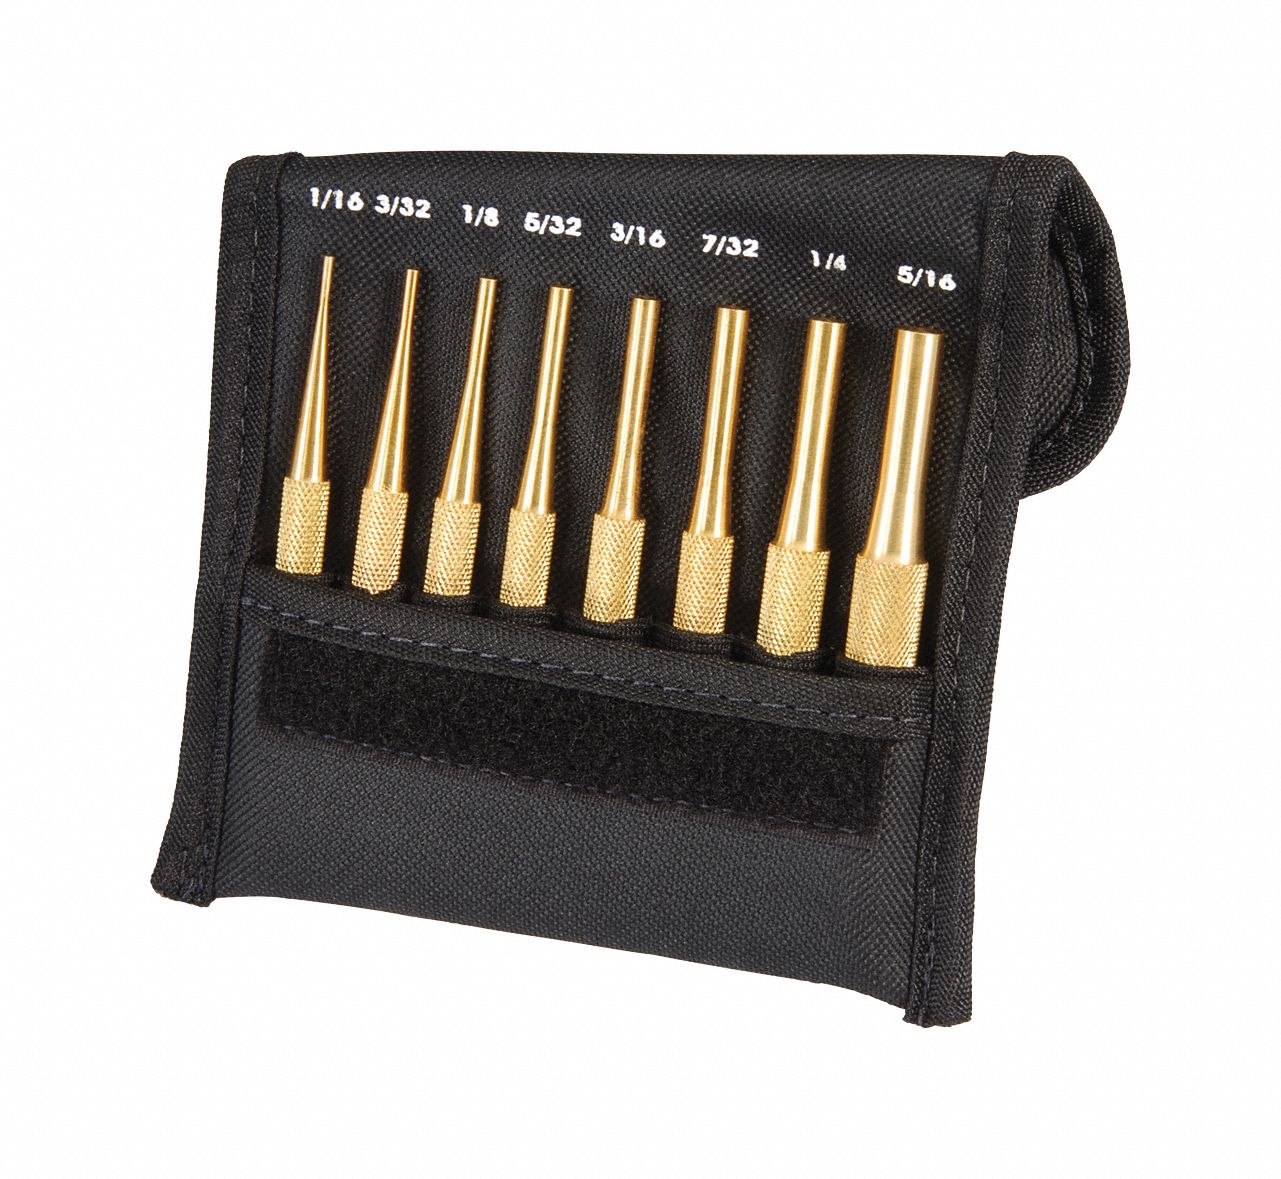 913611-6 Proto Drive Pin Punch Set: 5/32 in_3/16 in_7/32 in_1/4 in_5/16 in  Tip Dia, 8 in Overall Lg, 5 Pieces, SAE